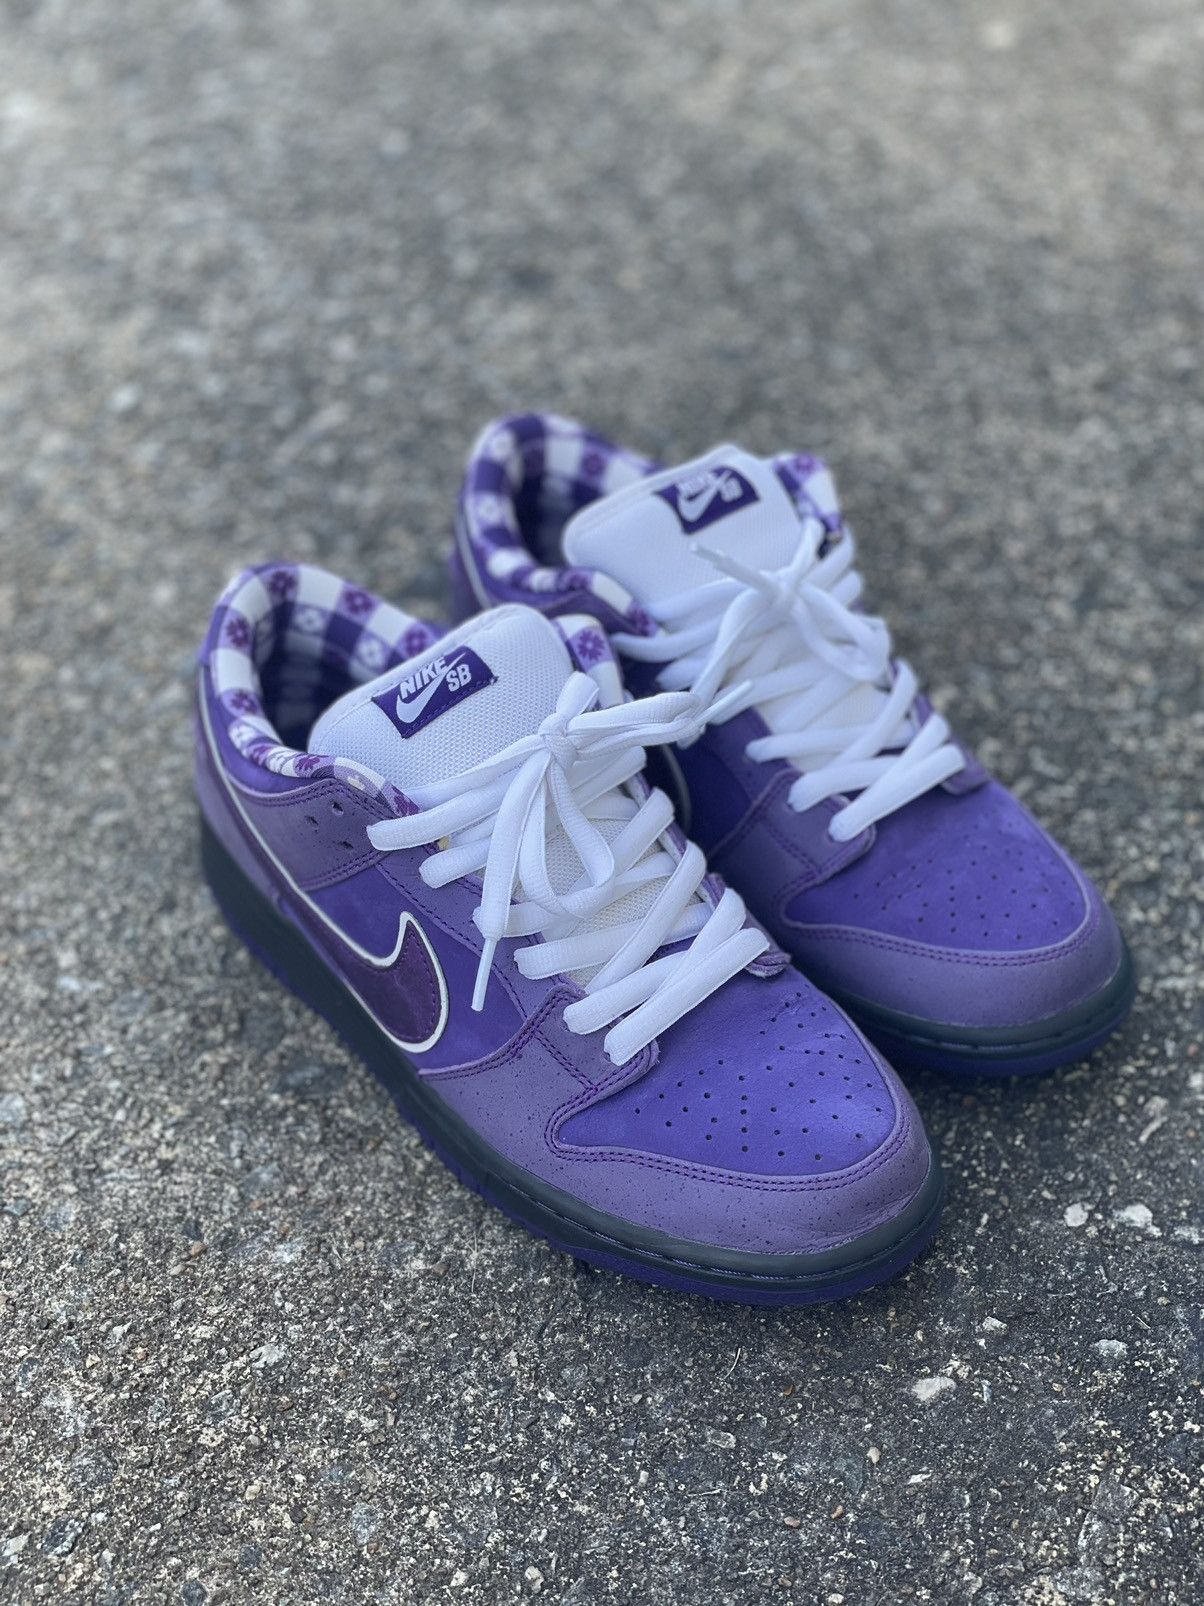 Nike Concepts x Dunk Low SB Purple Lobster 2018 | Grailed